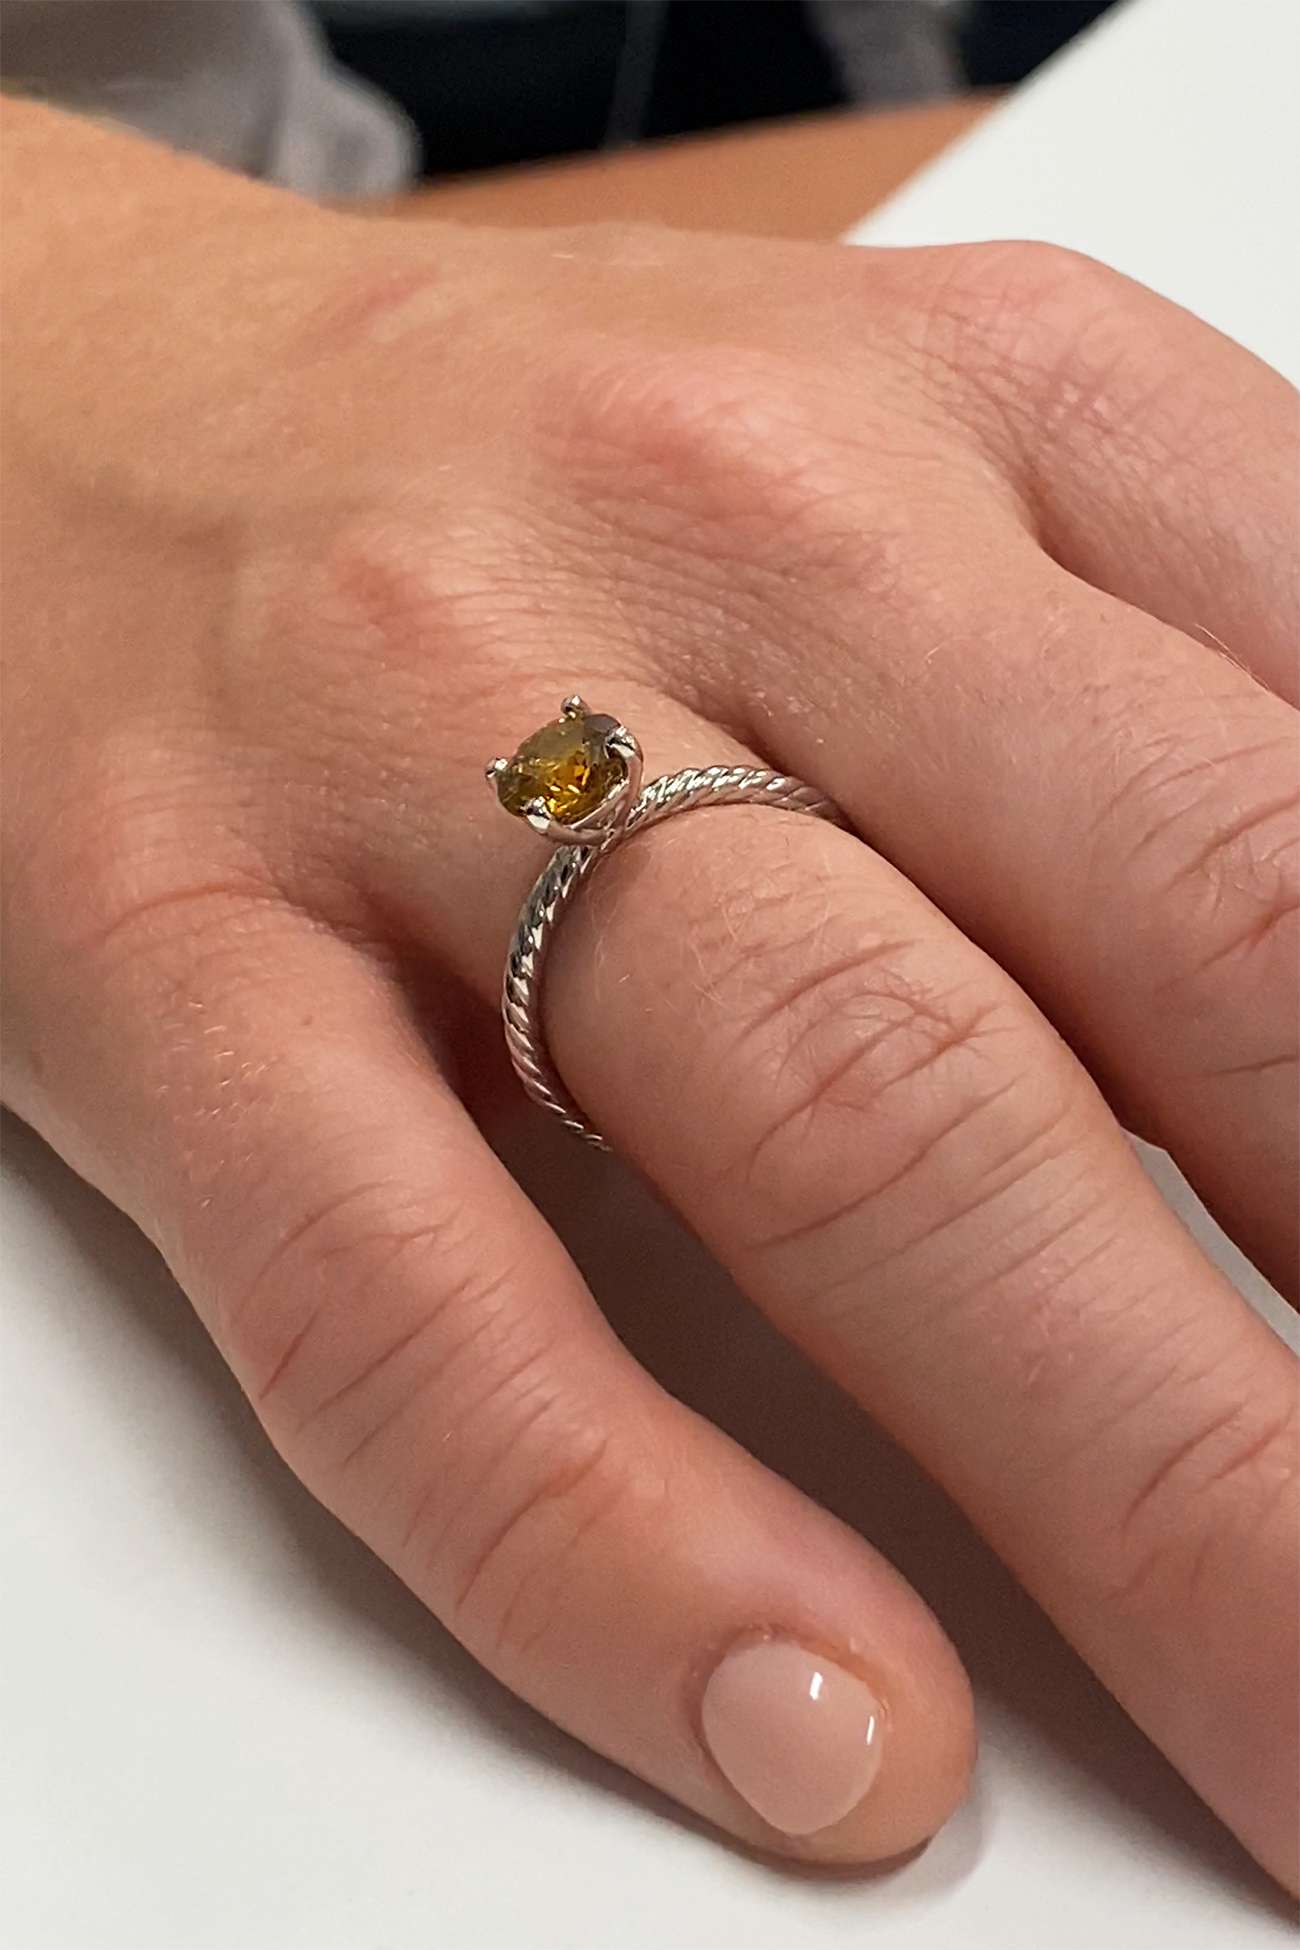 Close-up of ring on woman's finger